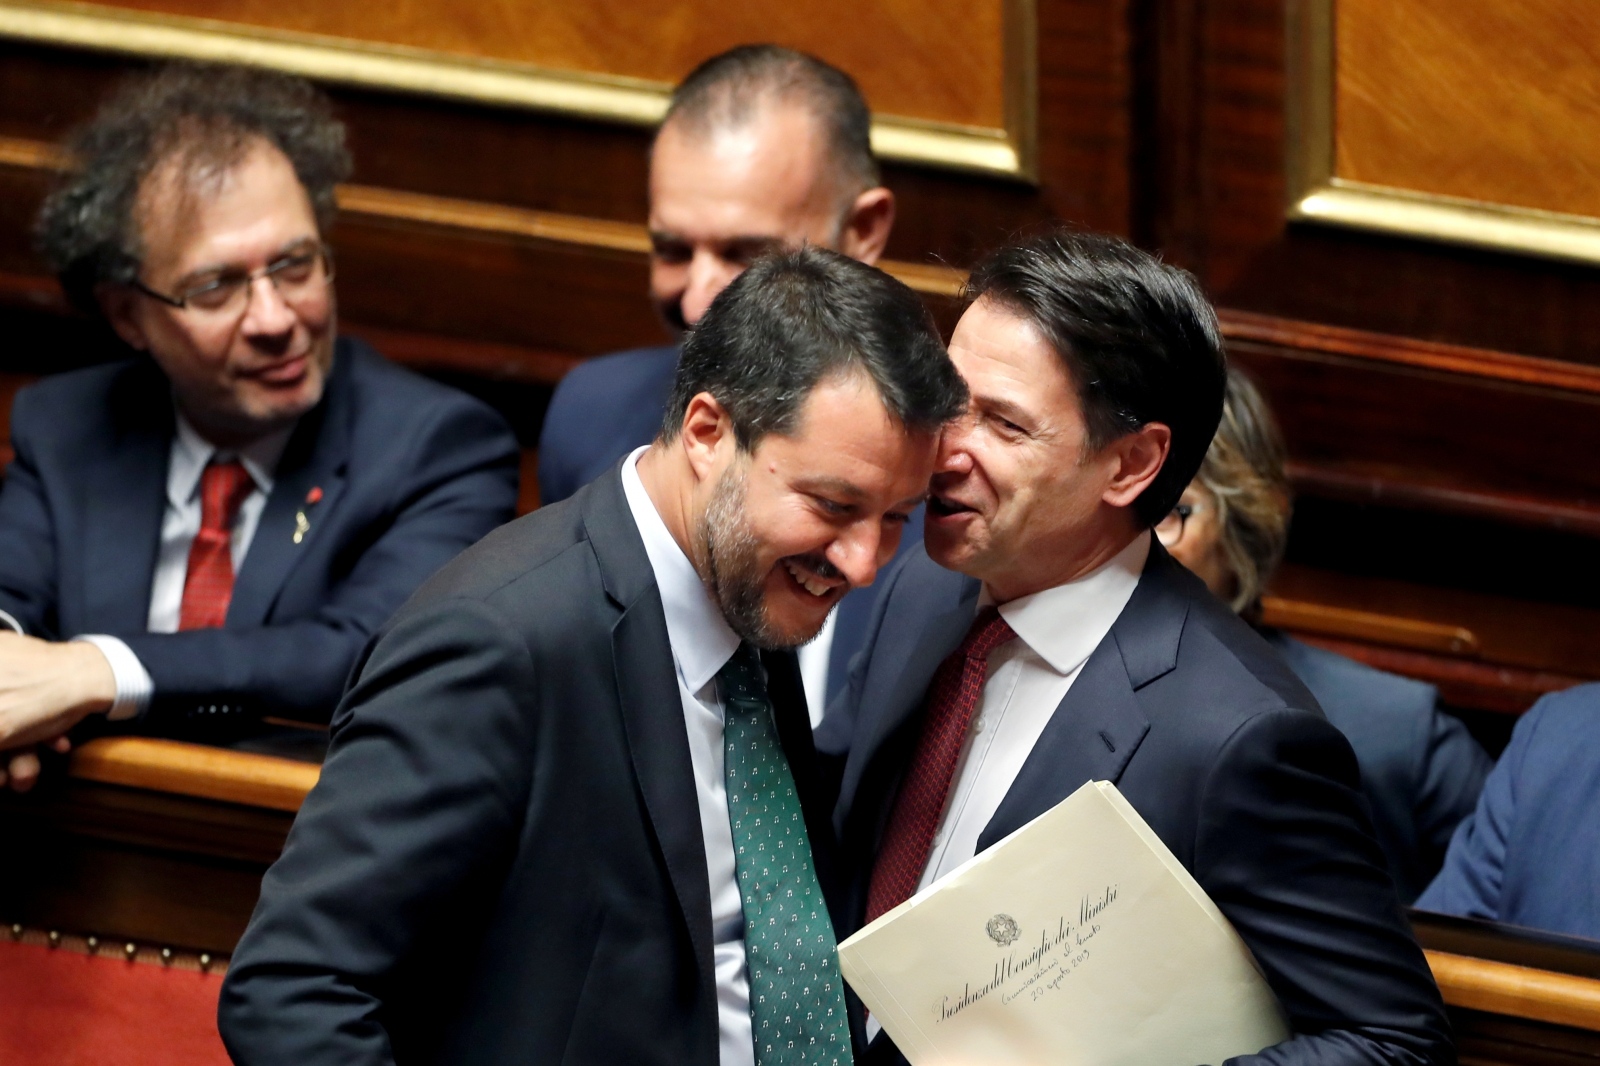 Italian Prime Minister Giuseppe Conte addresses the upper house of parliament over the ongoing government crisis, in Rome Italian Prime Minister Giuseppe Conte speaks with Italian Deputy PM Matteo Salvini before addressing the upper house of parliament over the ongoing government crisis, in Rome, Italy August 20, 2019. REUTERS/Yara Nardi     TPX IMAGES OF THE DAY YARA NARDI